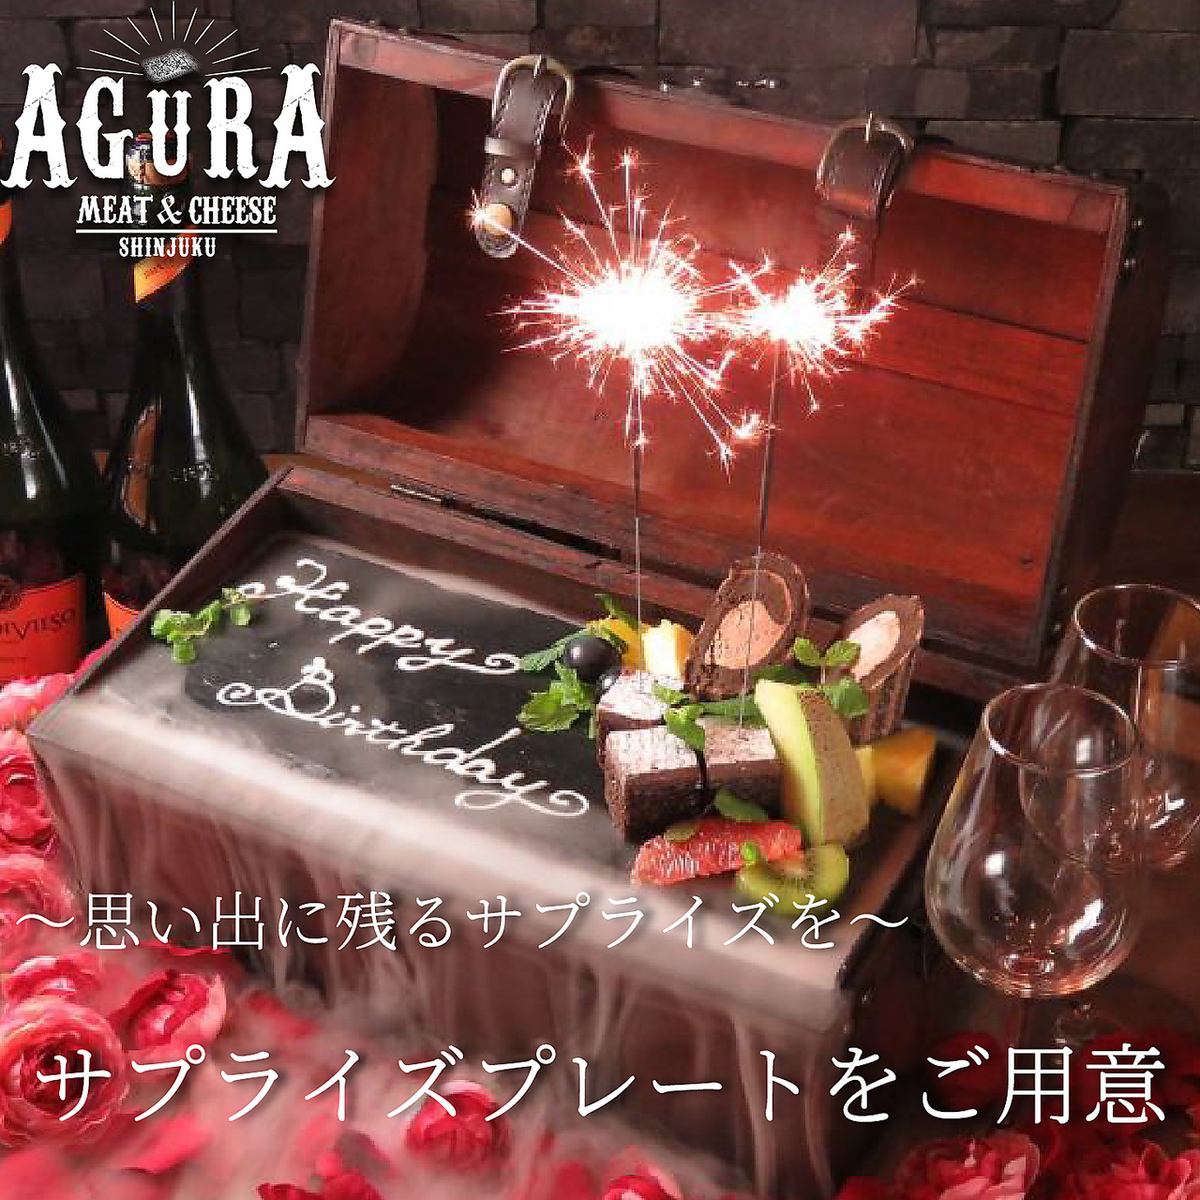 Recommended for group parties in a private room in a stylish store ◎